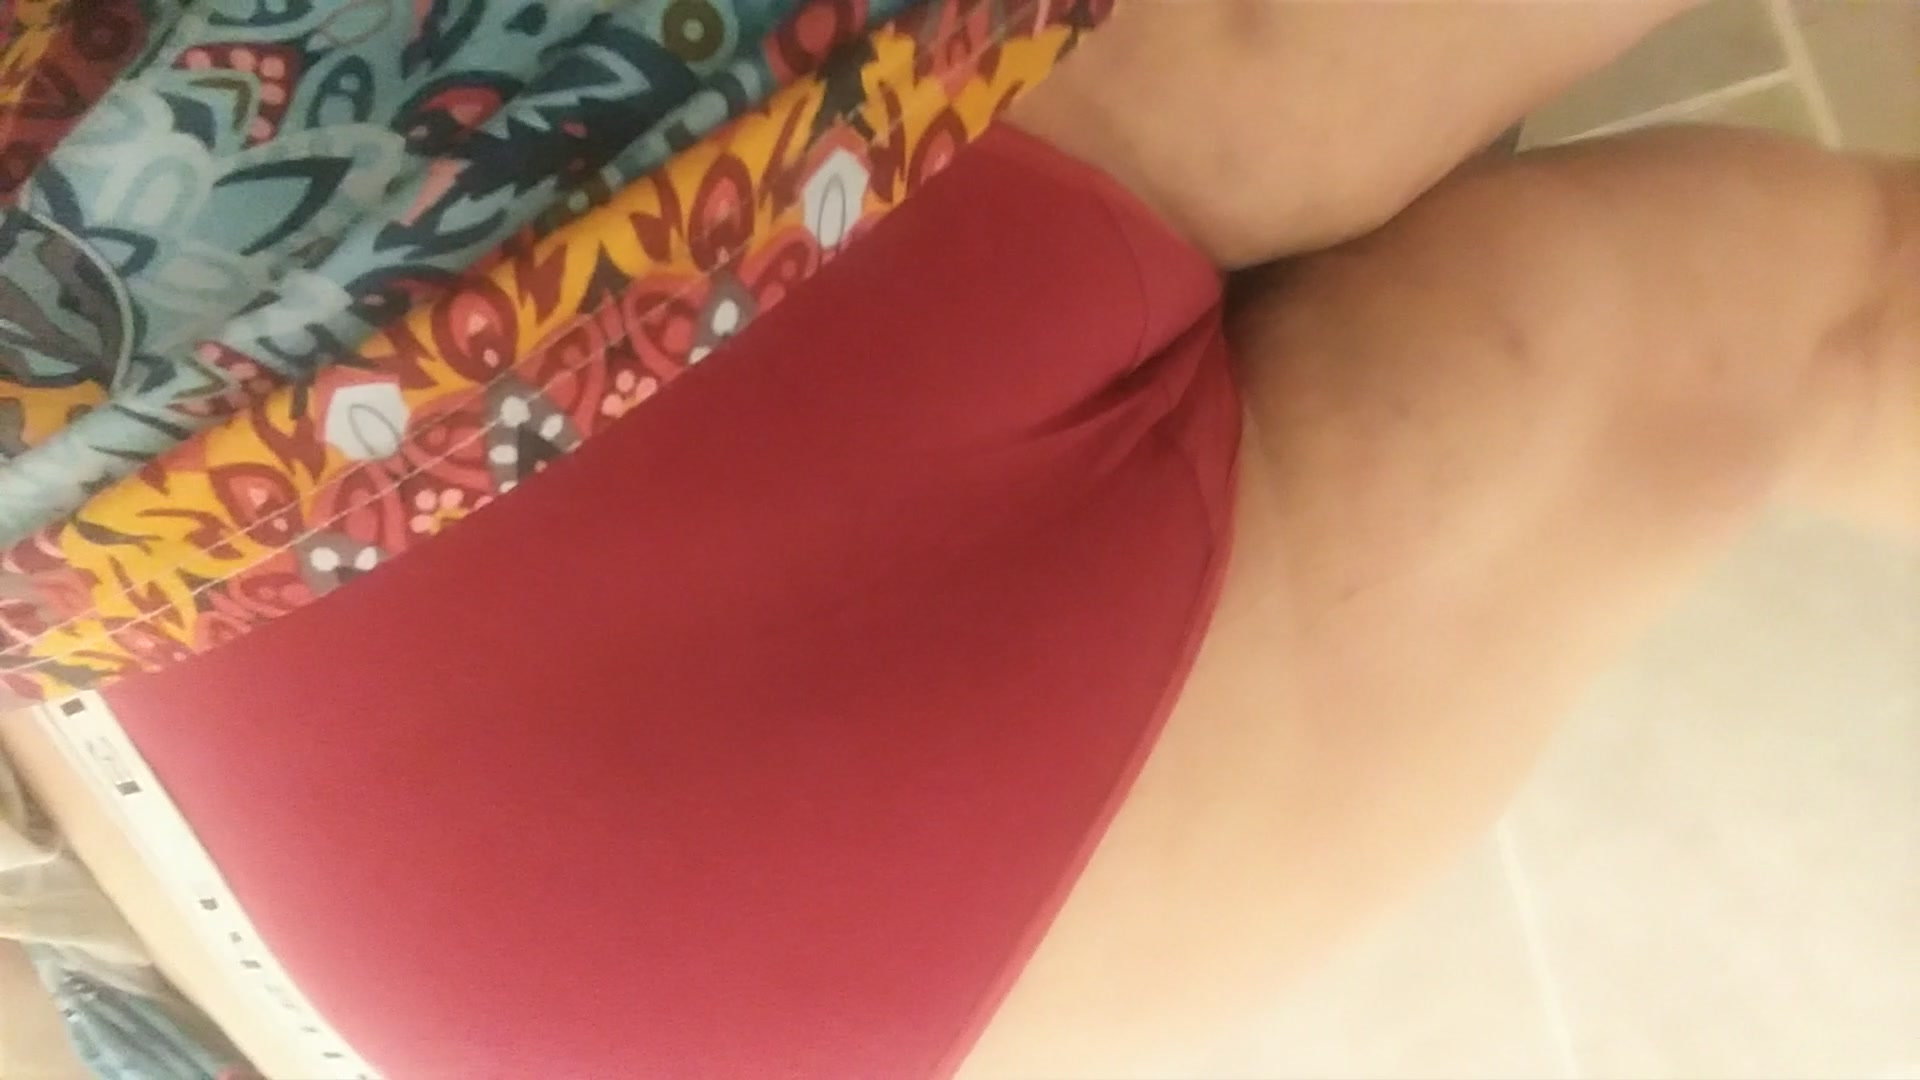 Upskirt Panty Poop (While Under A Trance)